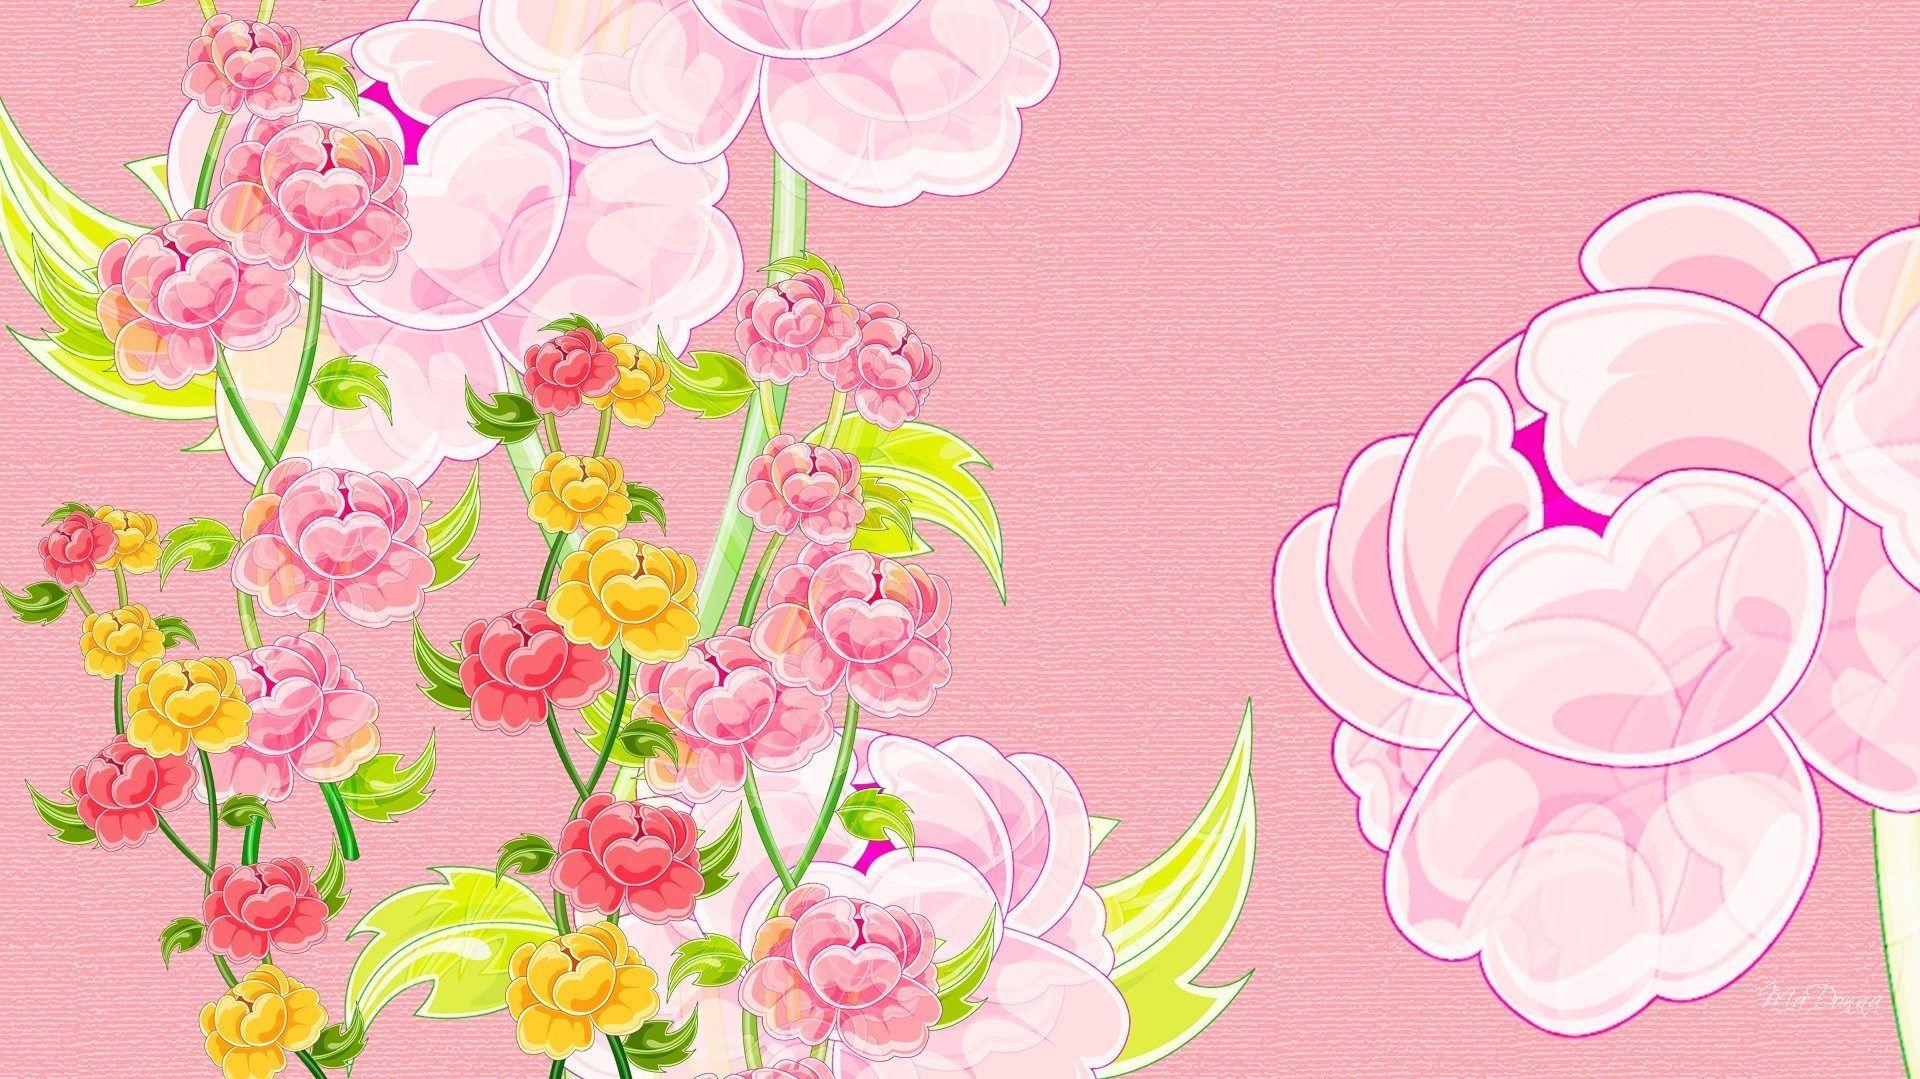 Abstract Floral Images 1920x1079